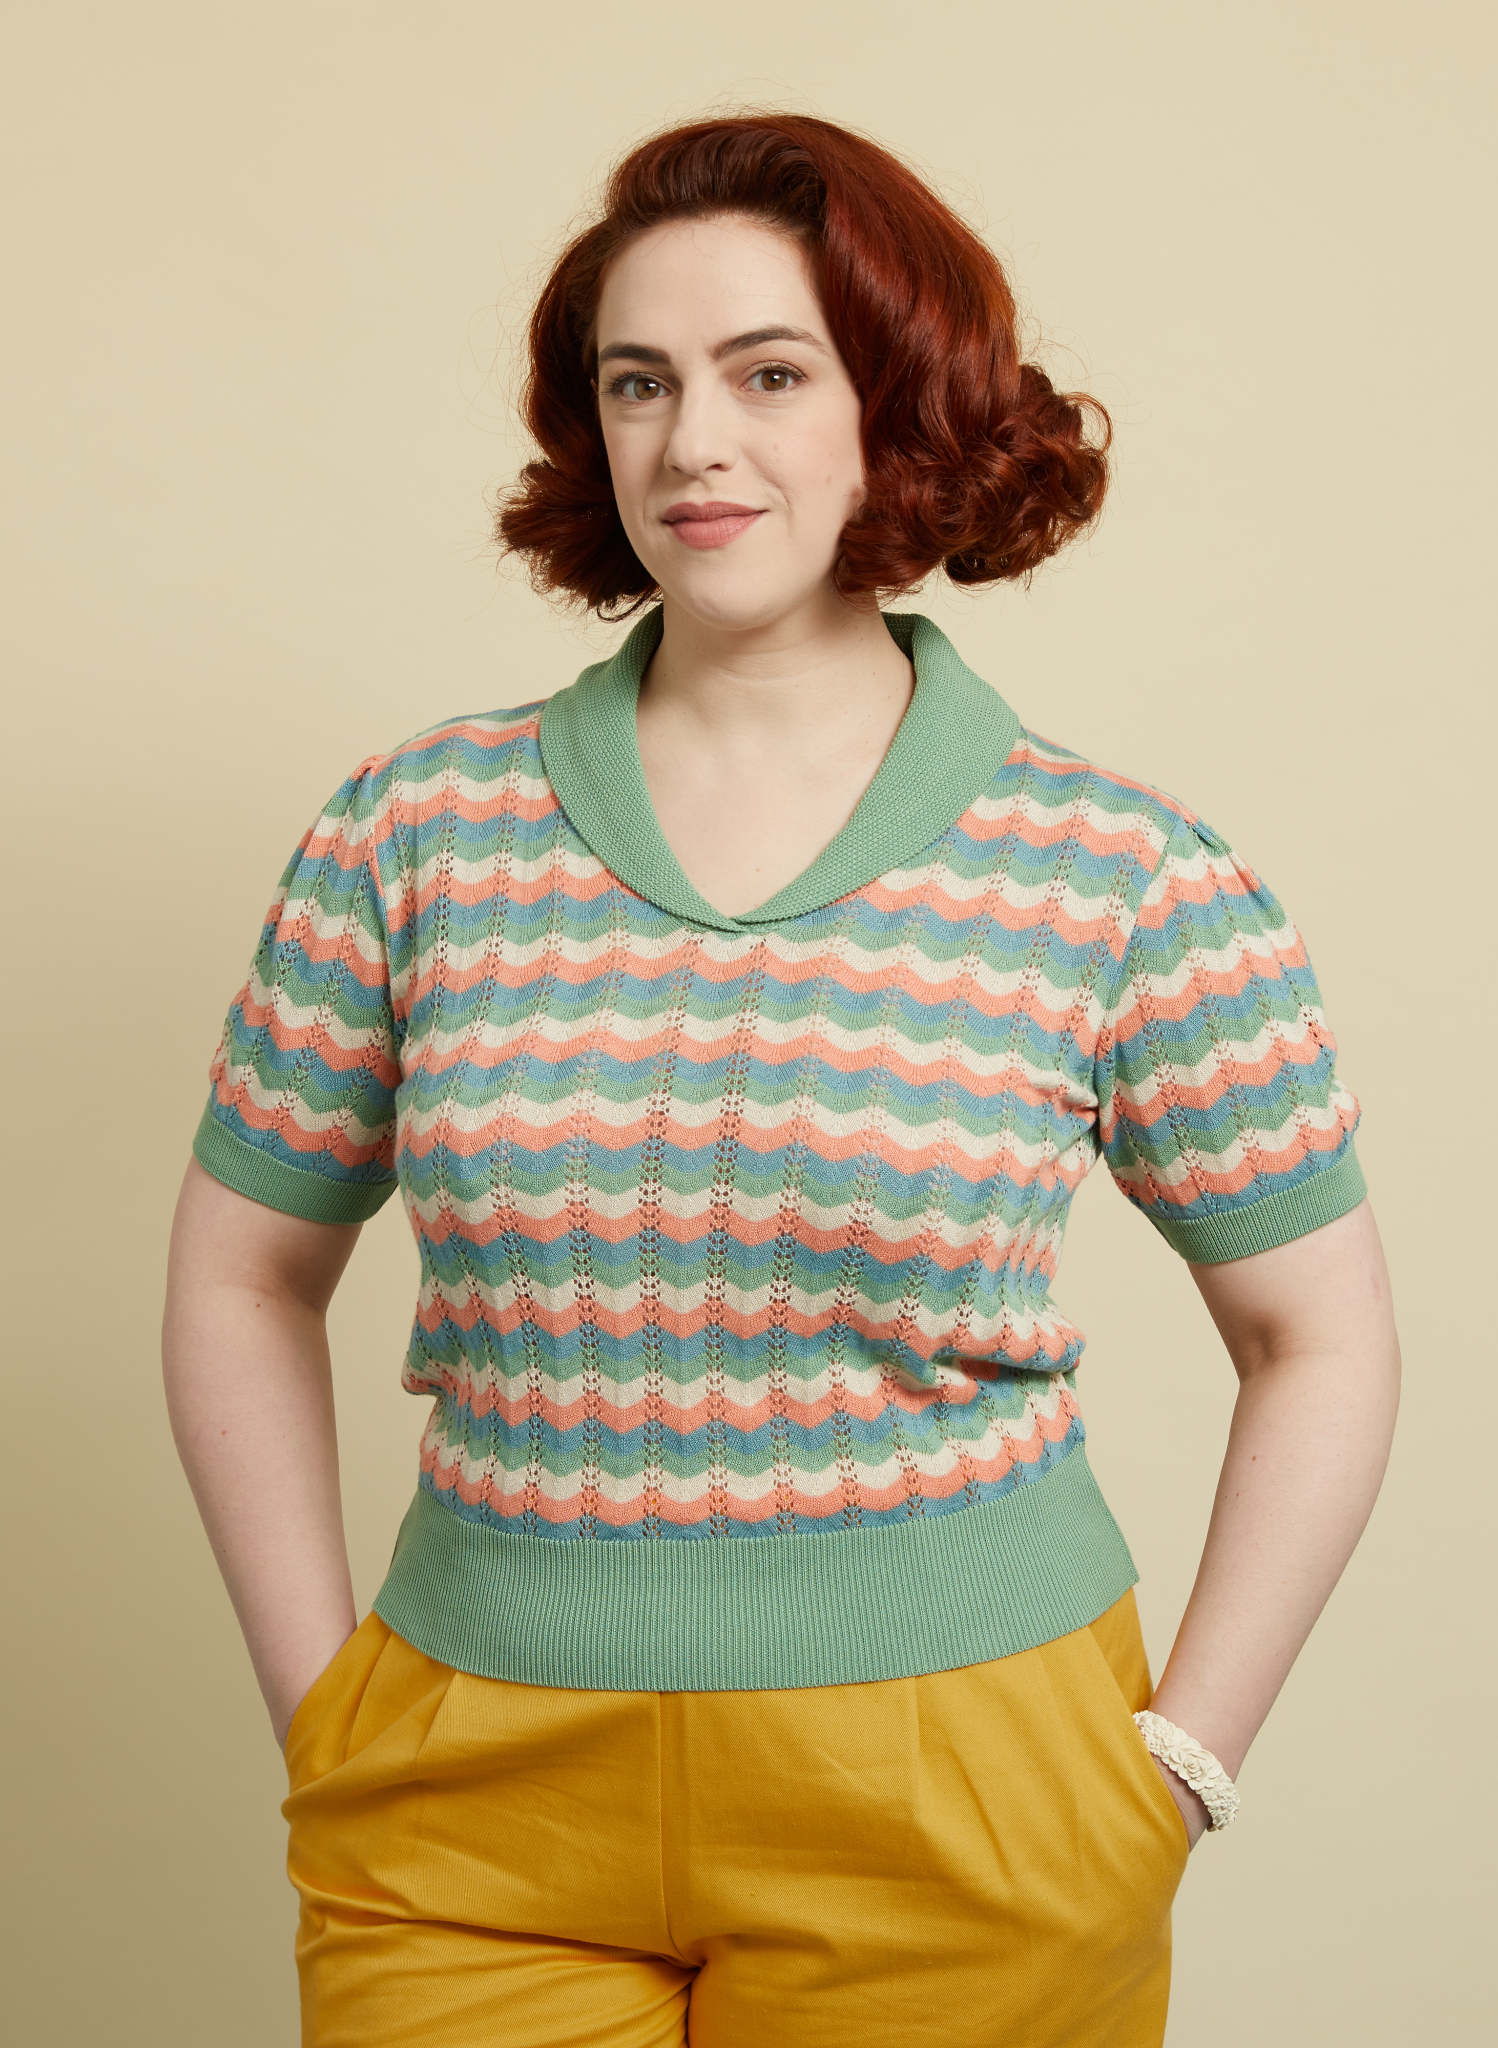 Hilary - Green Refresher Knitted Cotton Top